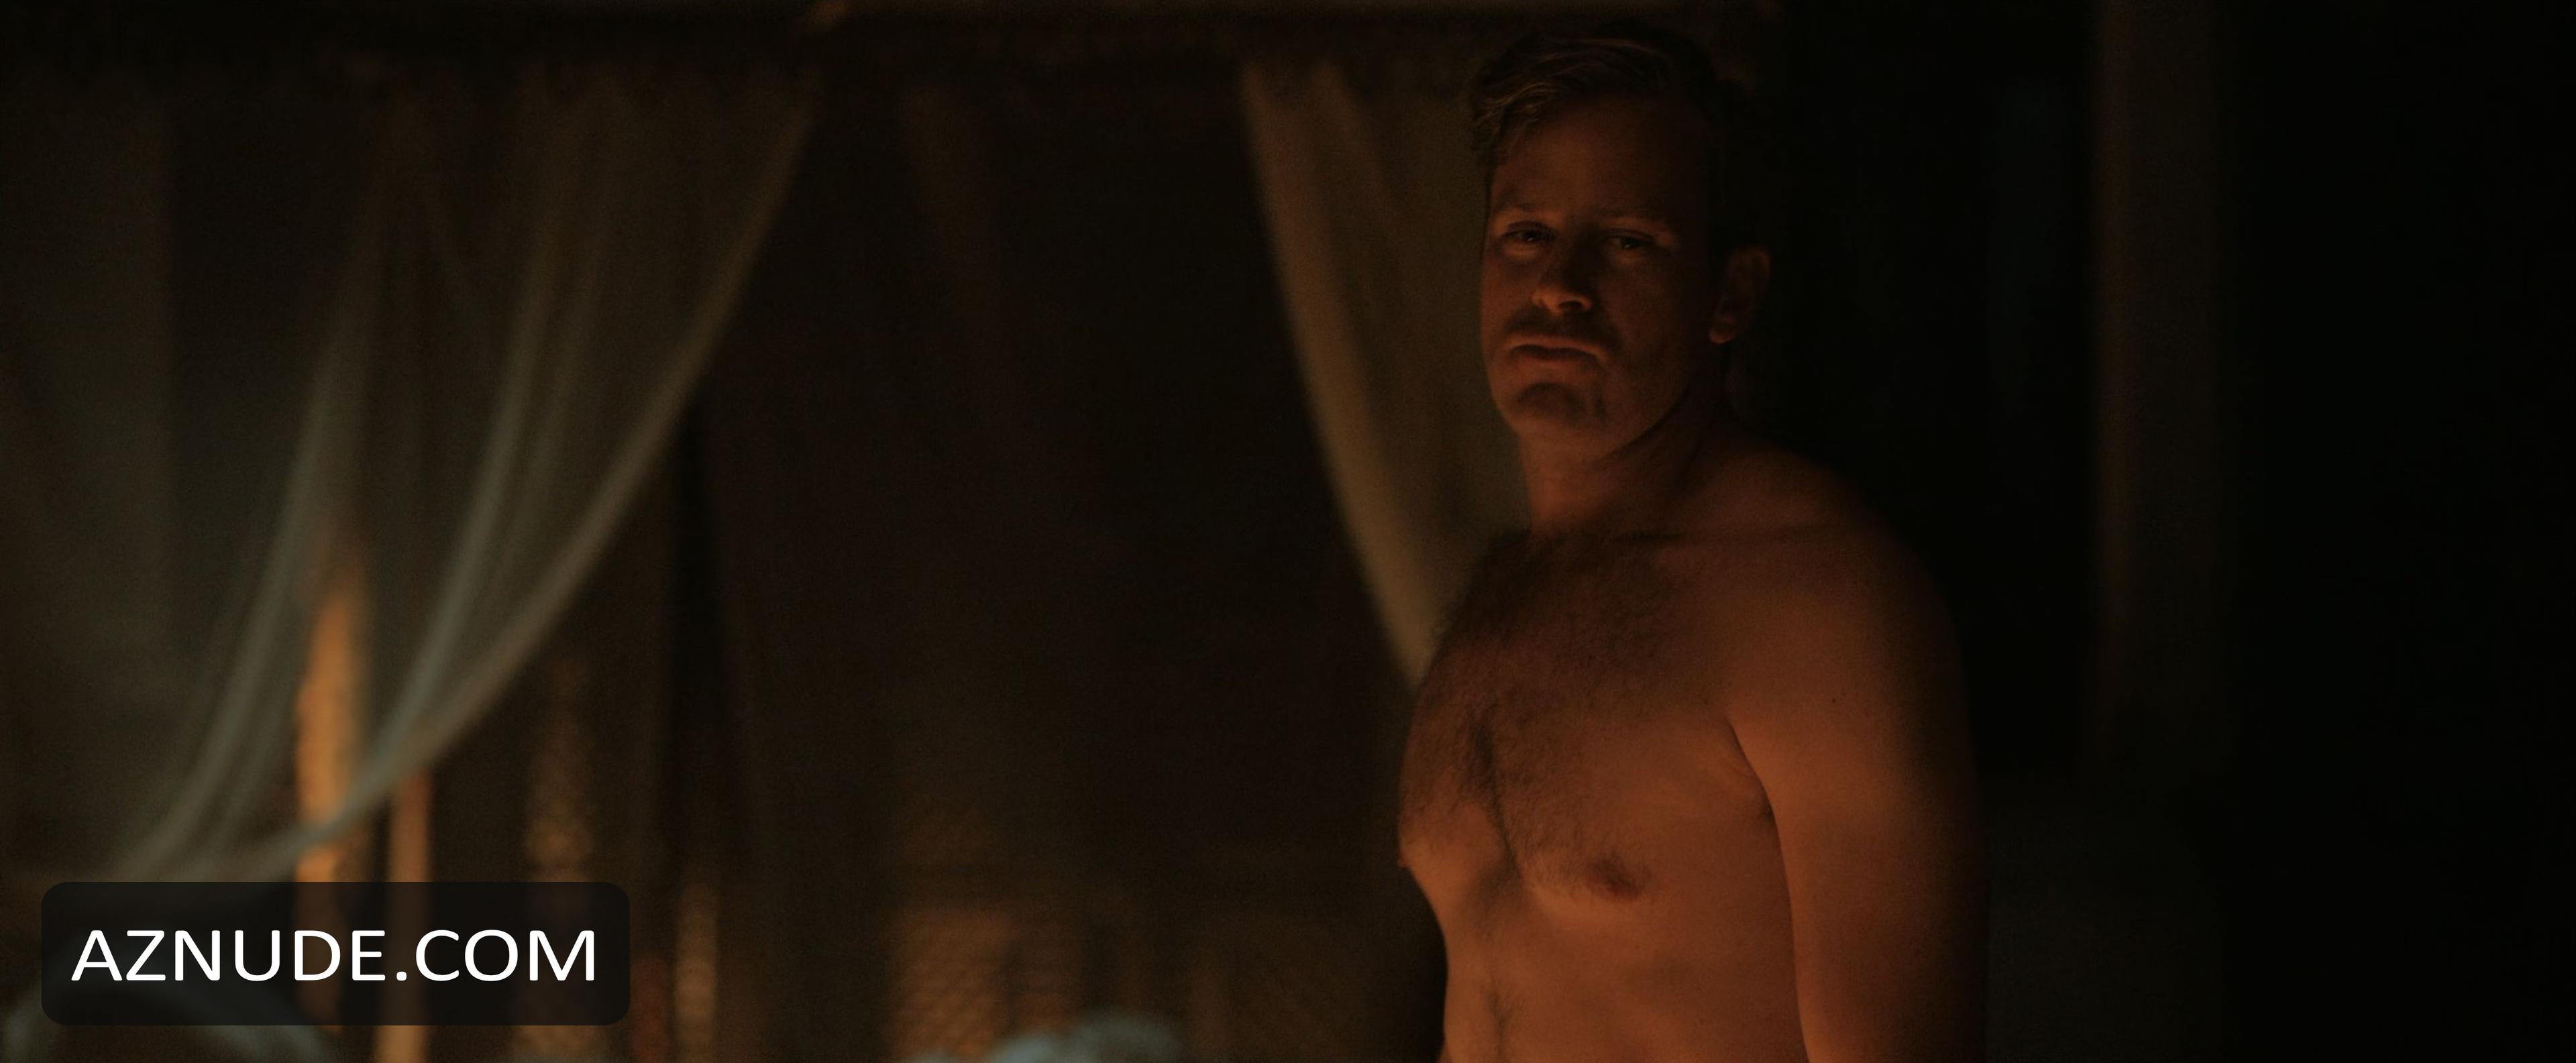 chris golab recommends Armie Hammer Naked